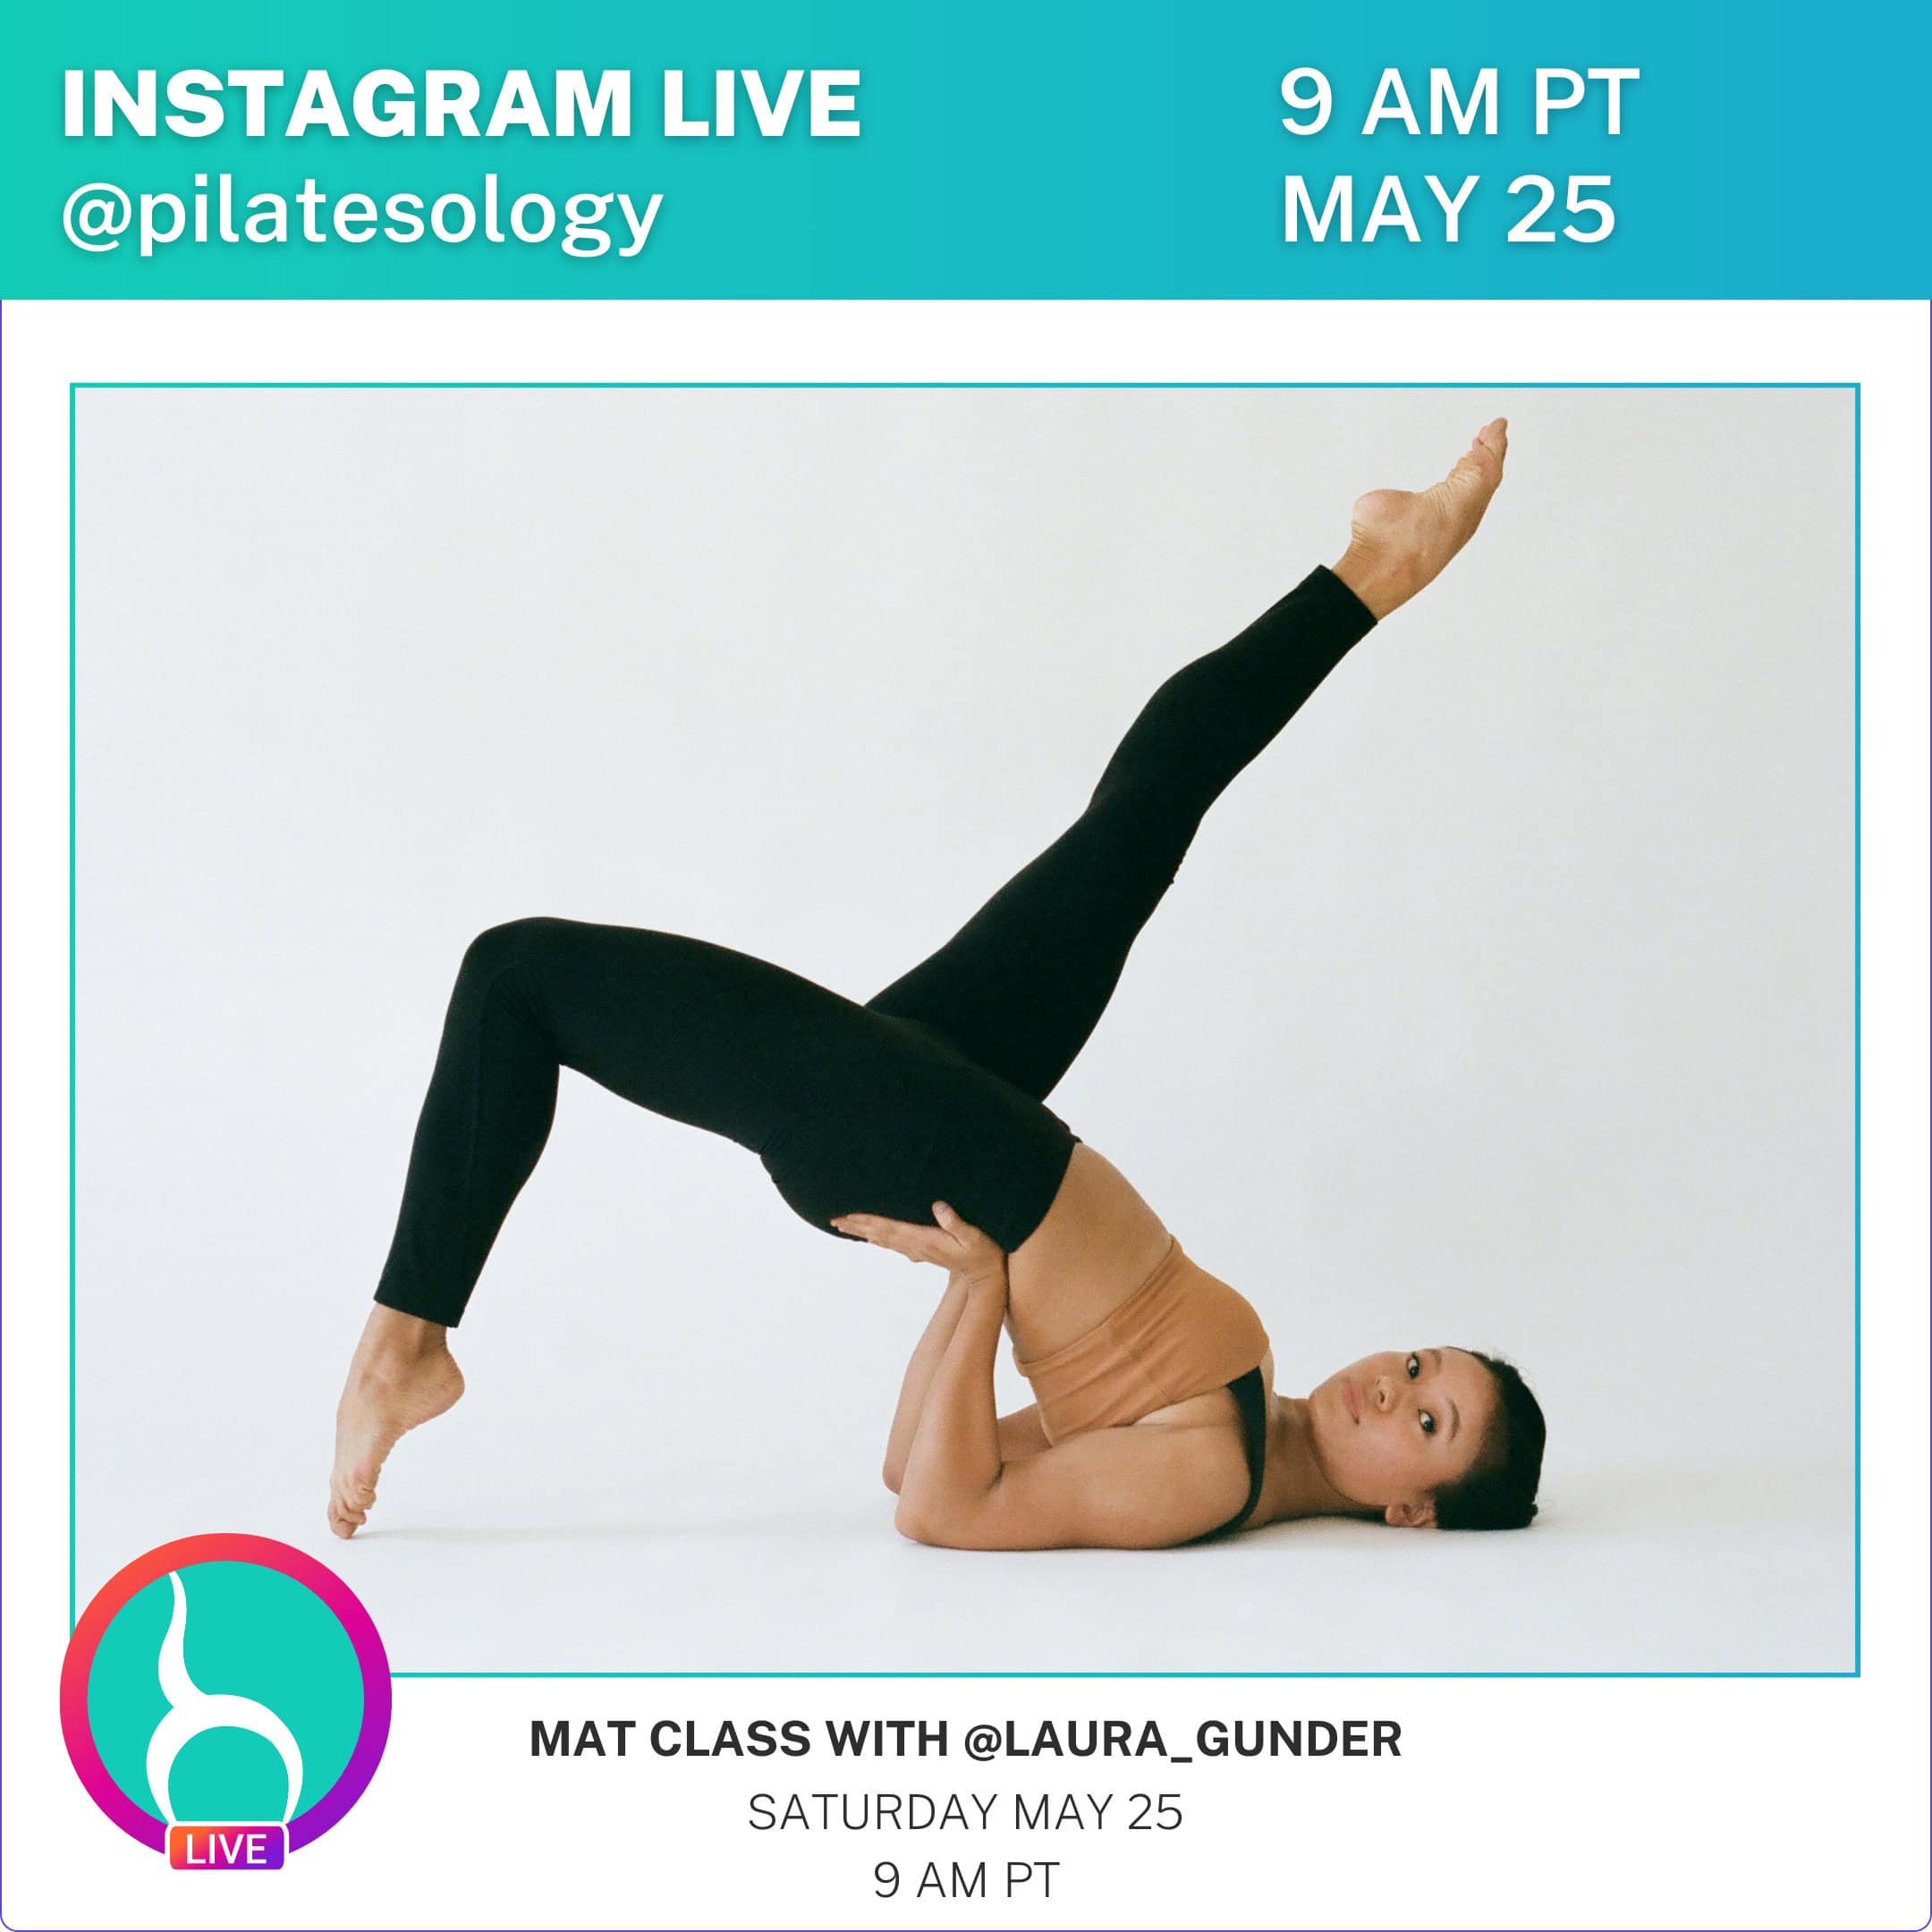 instagram live on pilatesology with laura gunder - may 25th at 9 am